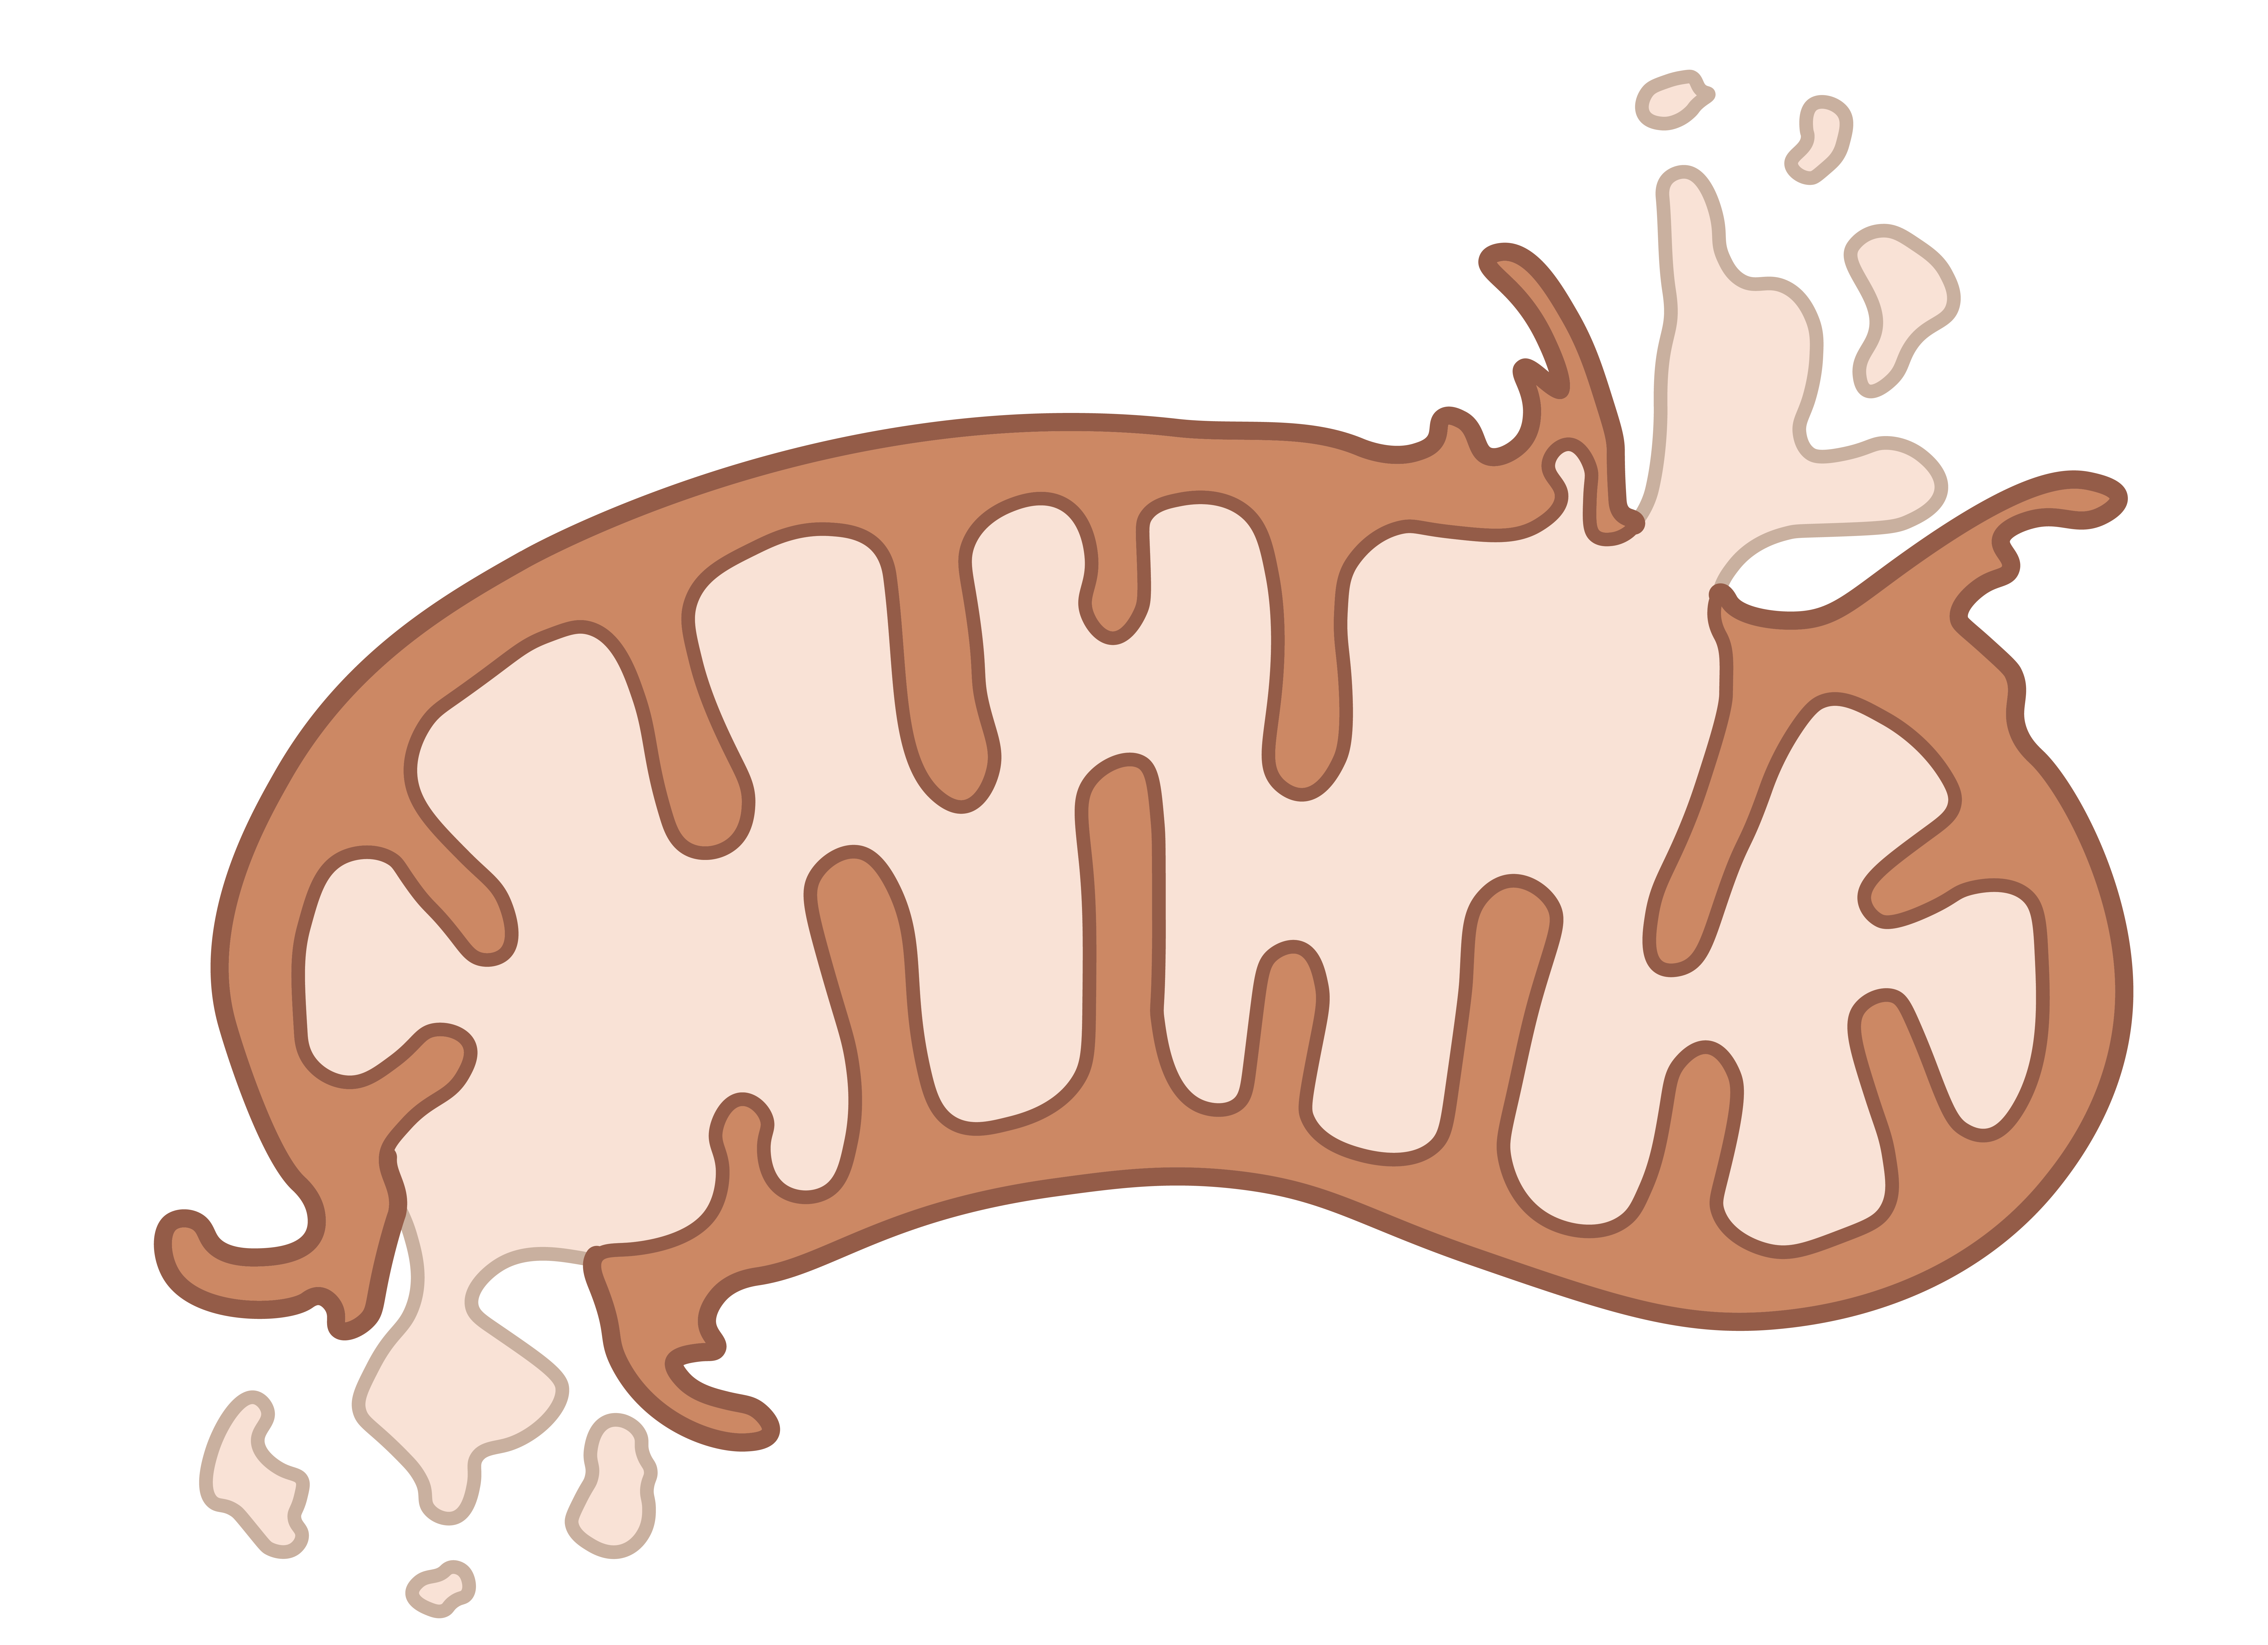 Illustration representing the effects of mitochondrial dysfunctions due to aging, including decreased ATP production, disrupted cellular processes, and the development of diseases.